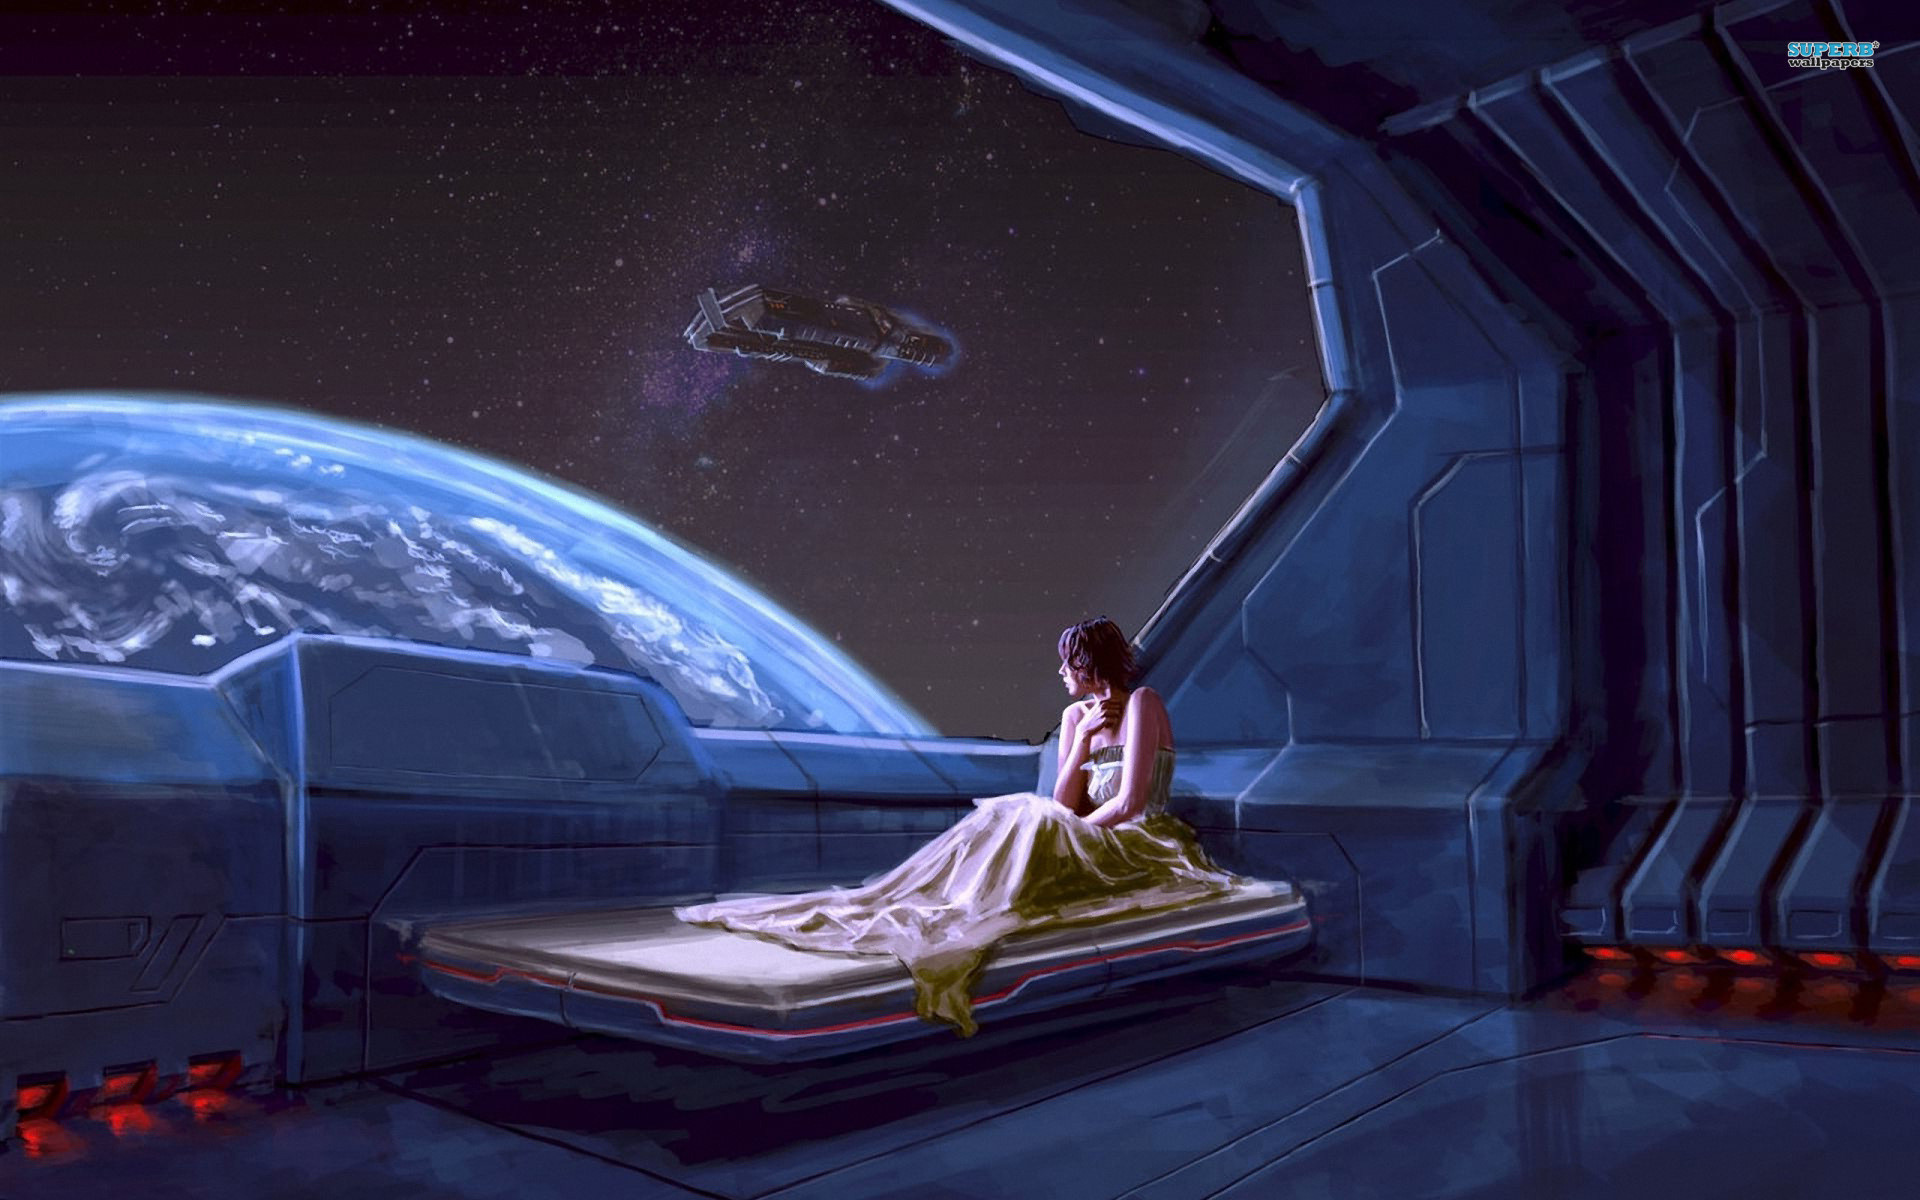 Girl in a spaceship wallpaper – Fantasy wallpapers –